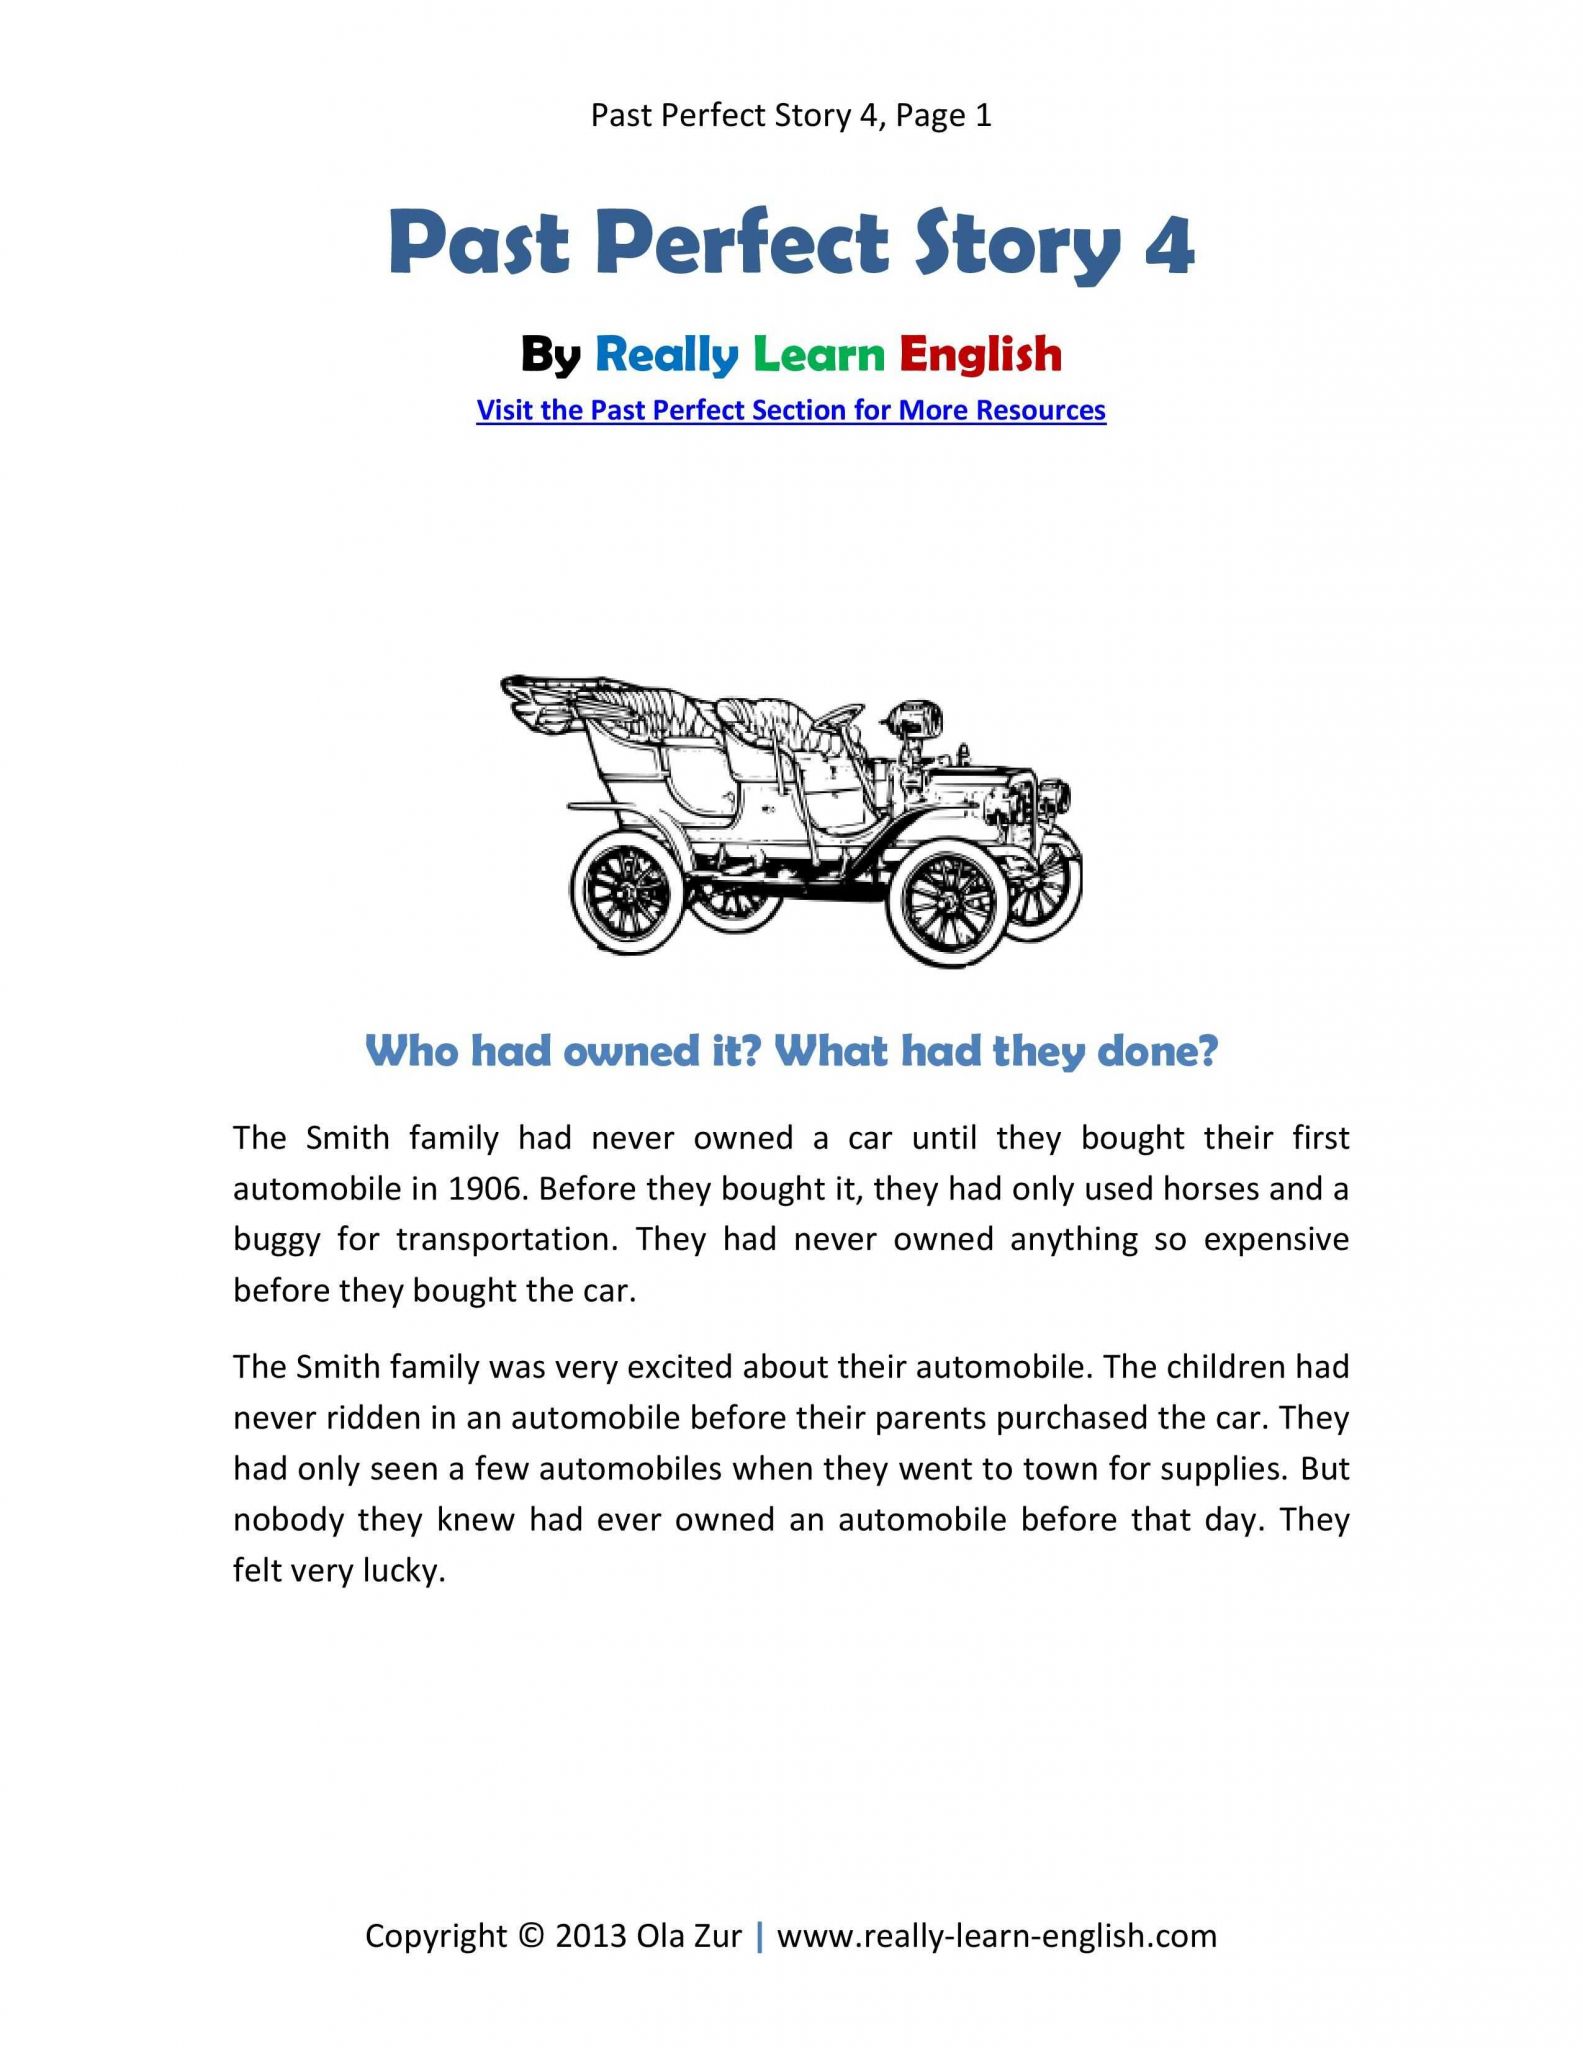 Respect Worksheets Pdf Also Free Printable Story and Worksheets to Practice the English Past